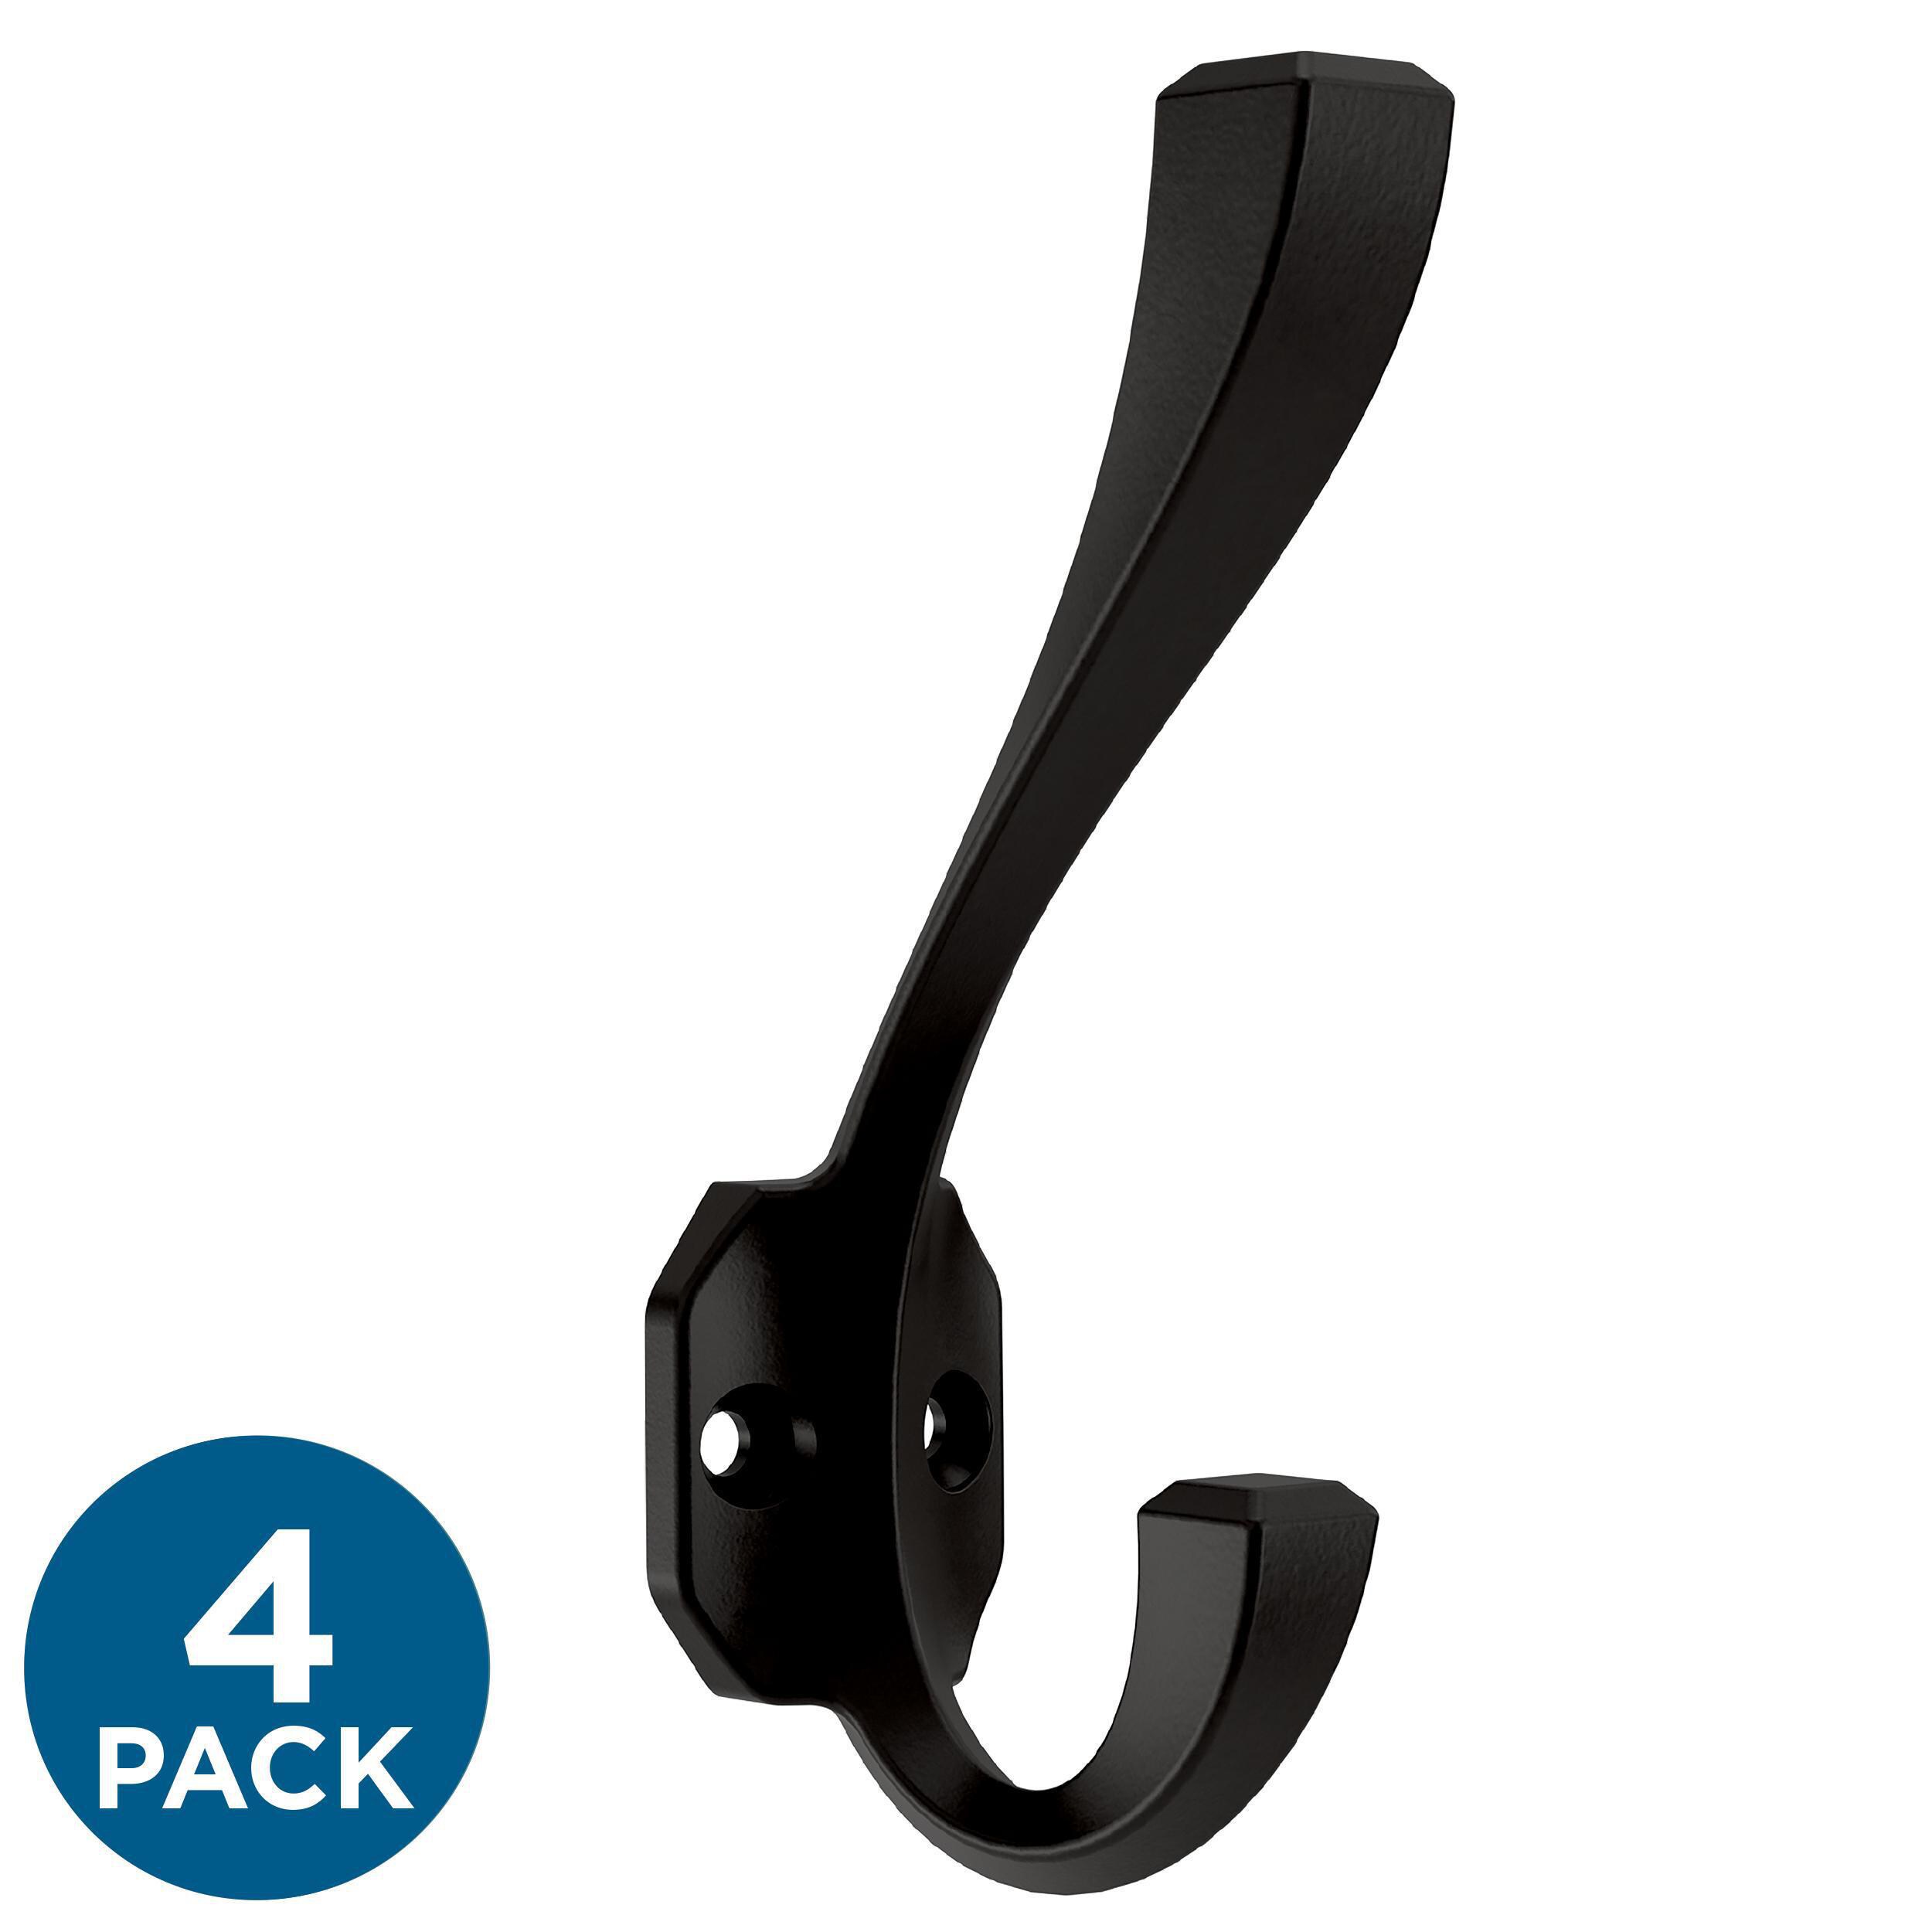 Hickory Hardware 5-Pack 1-Hook 3-in x 5-in H Black Iron Decorative